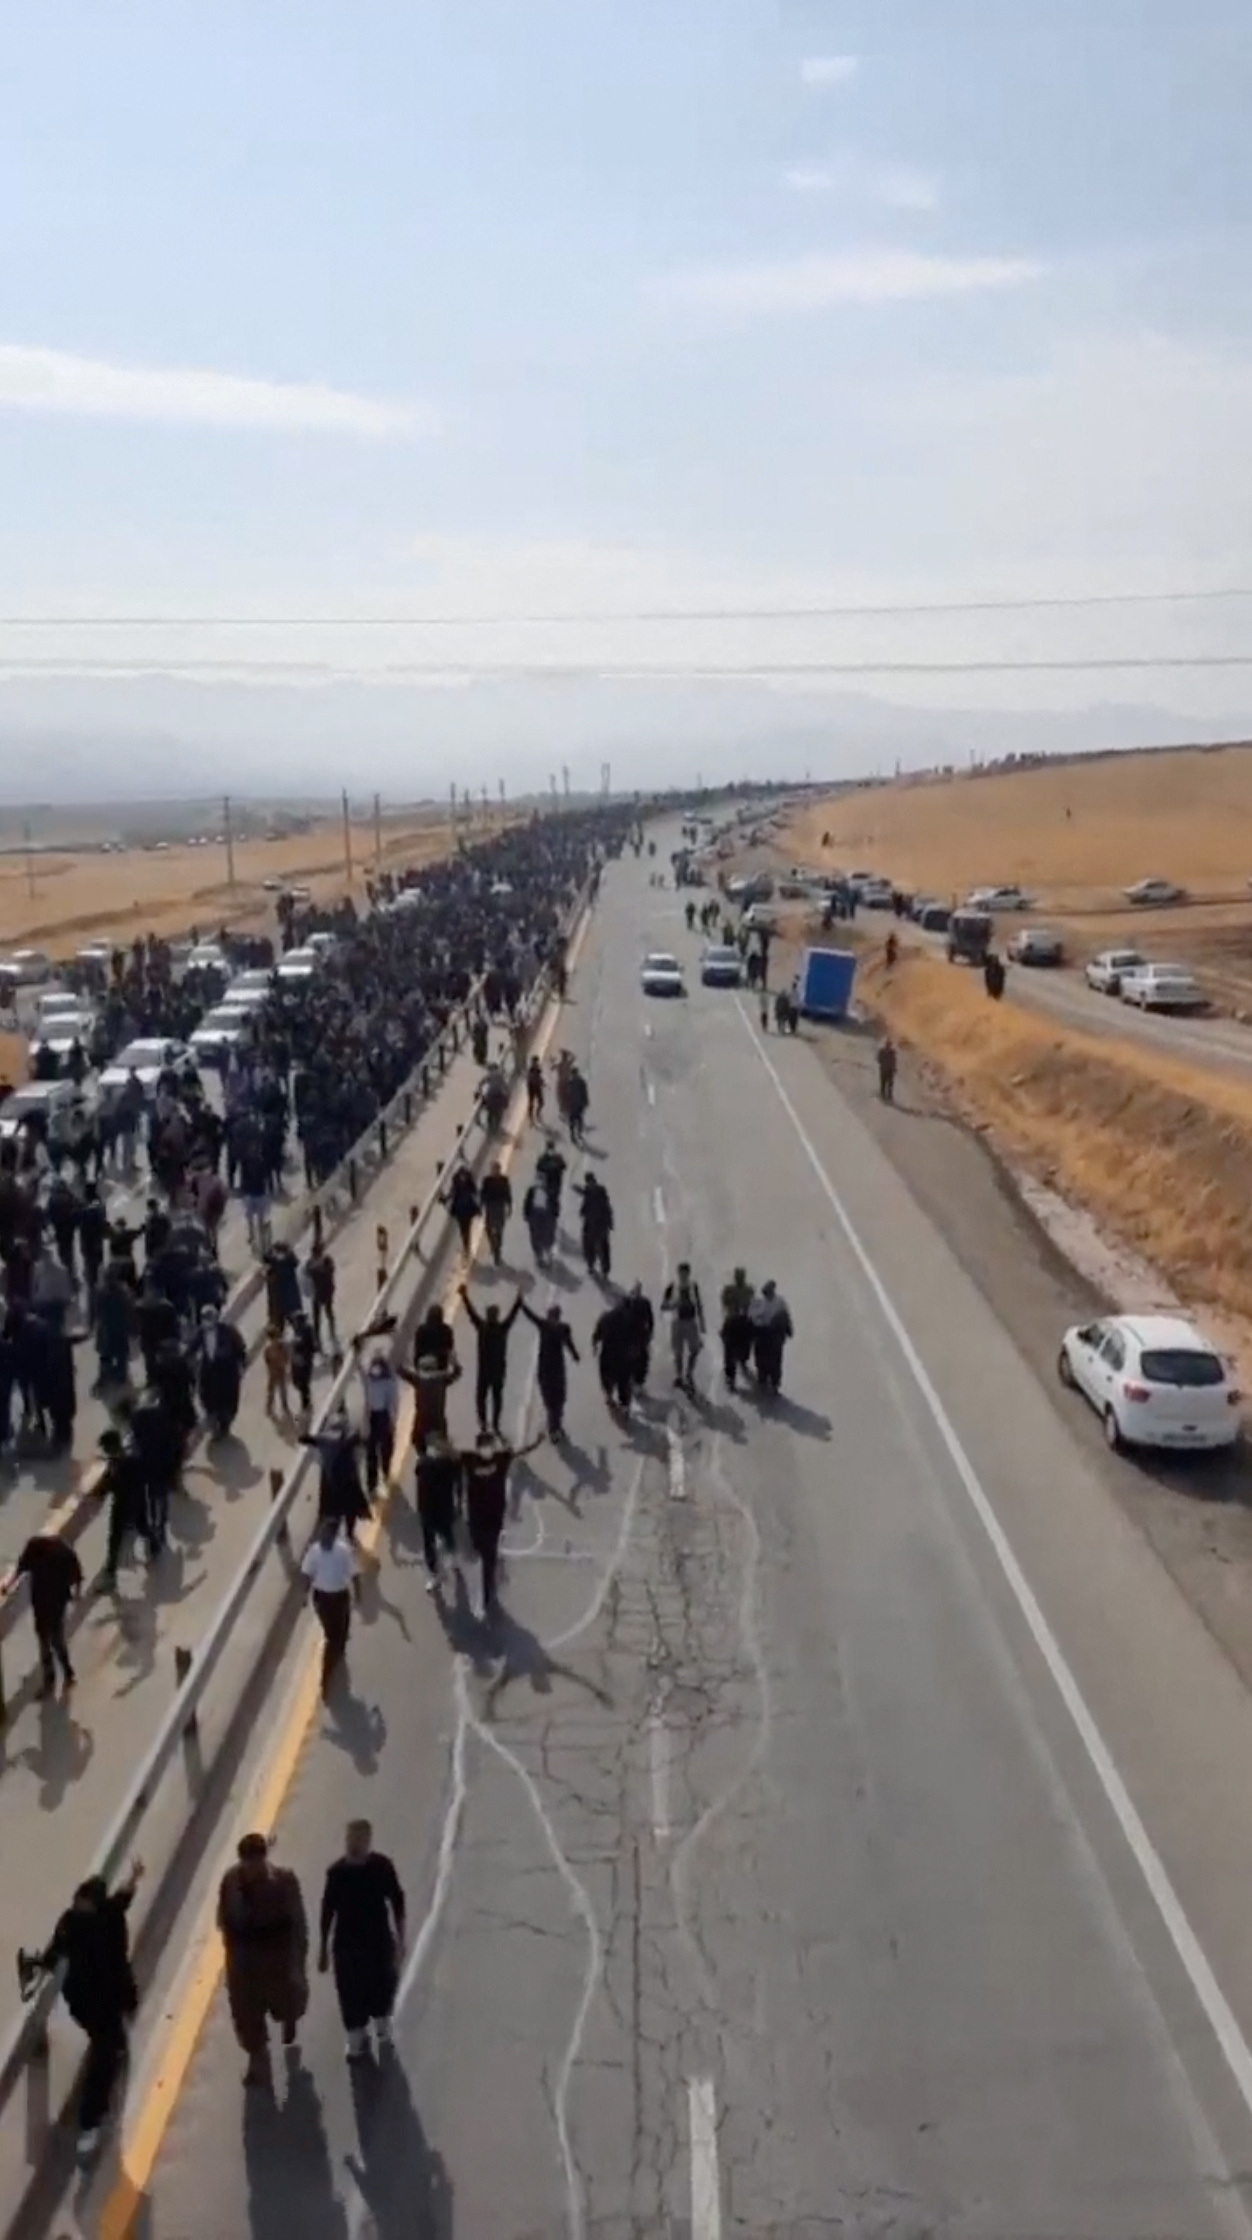 People march down the highway toward the Aychi Cemetery where Mahsa Amini is buried, near Saqez